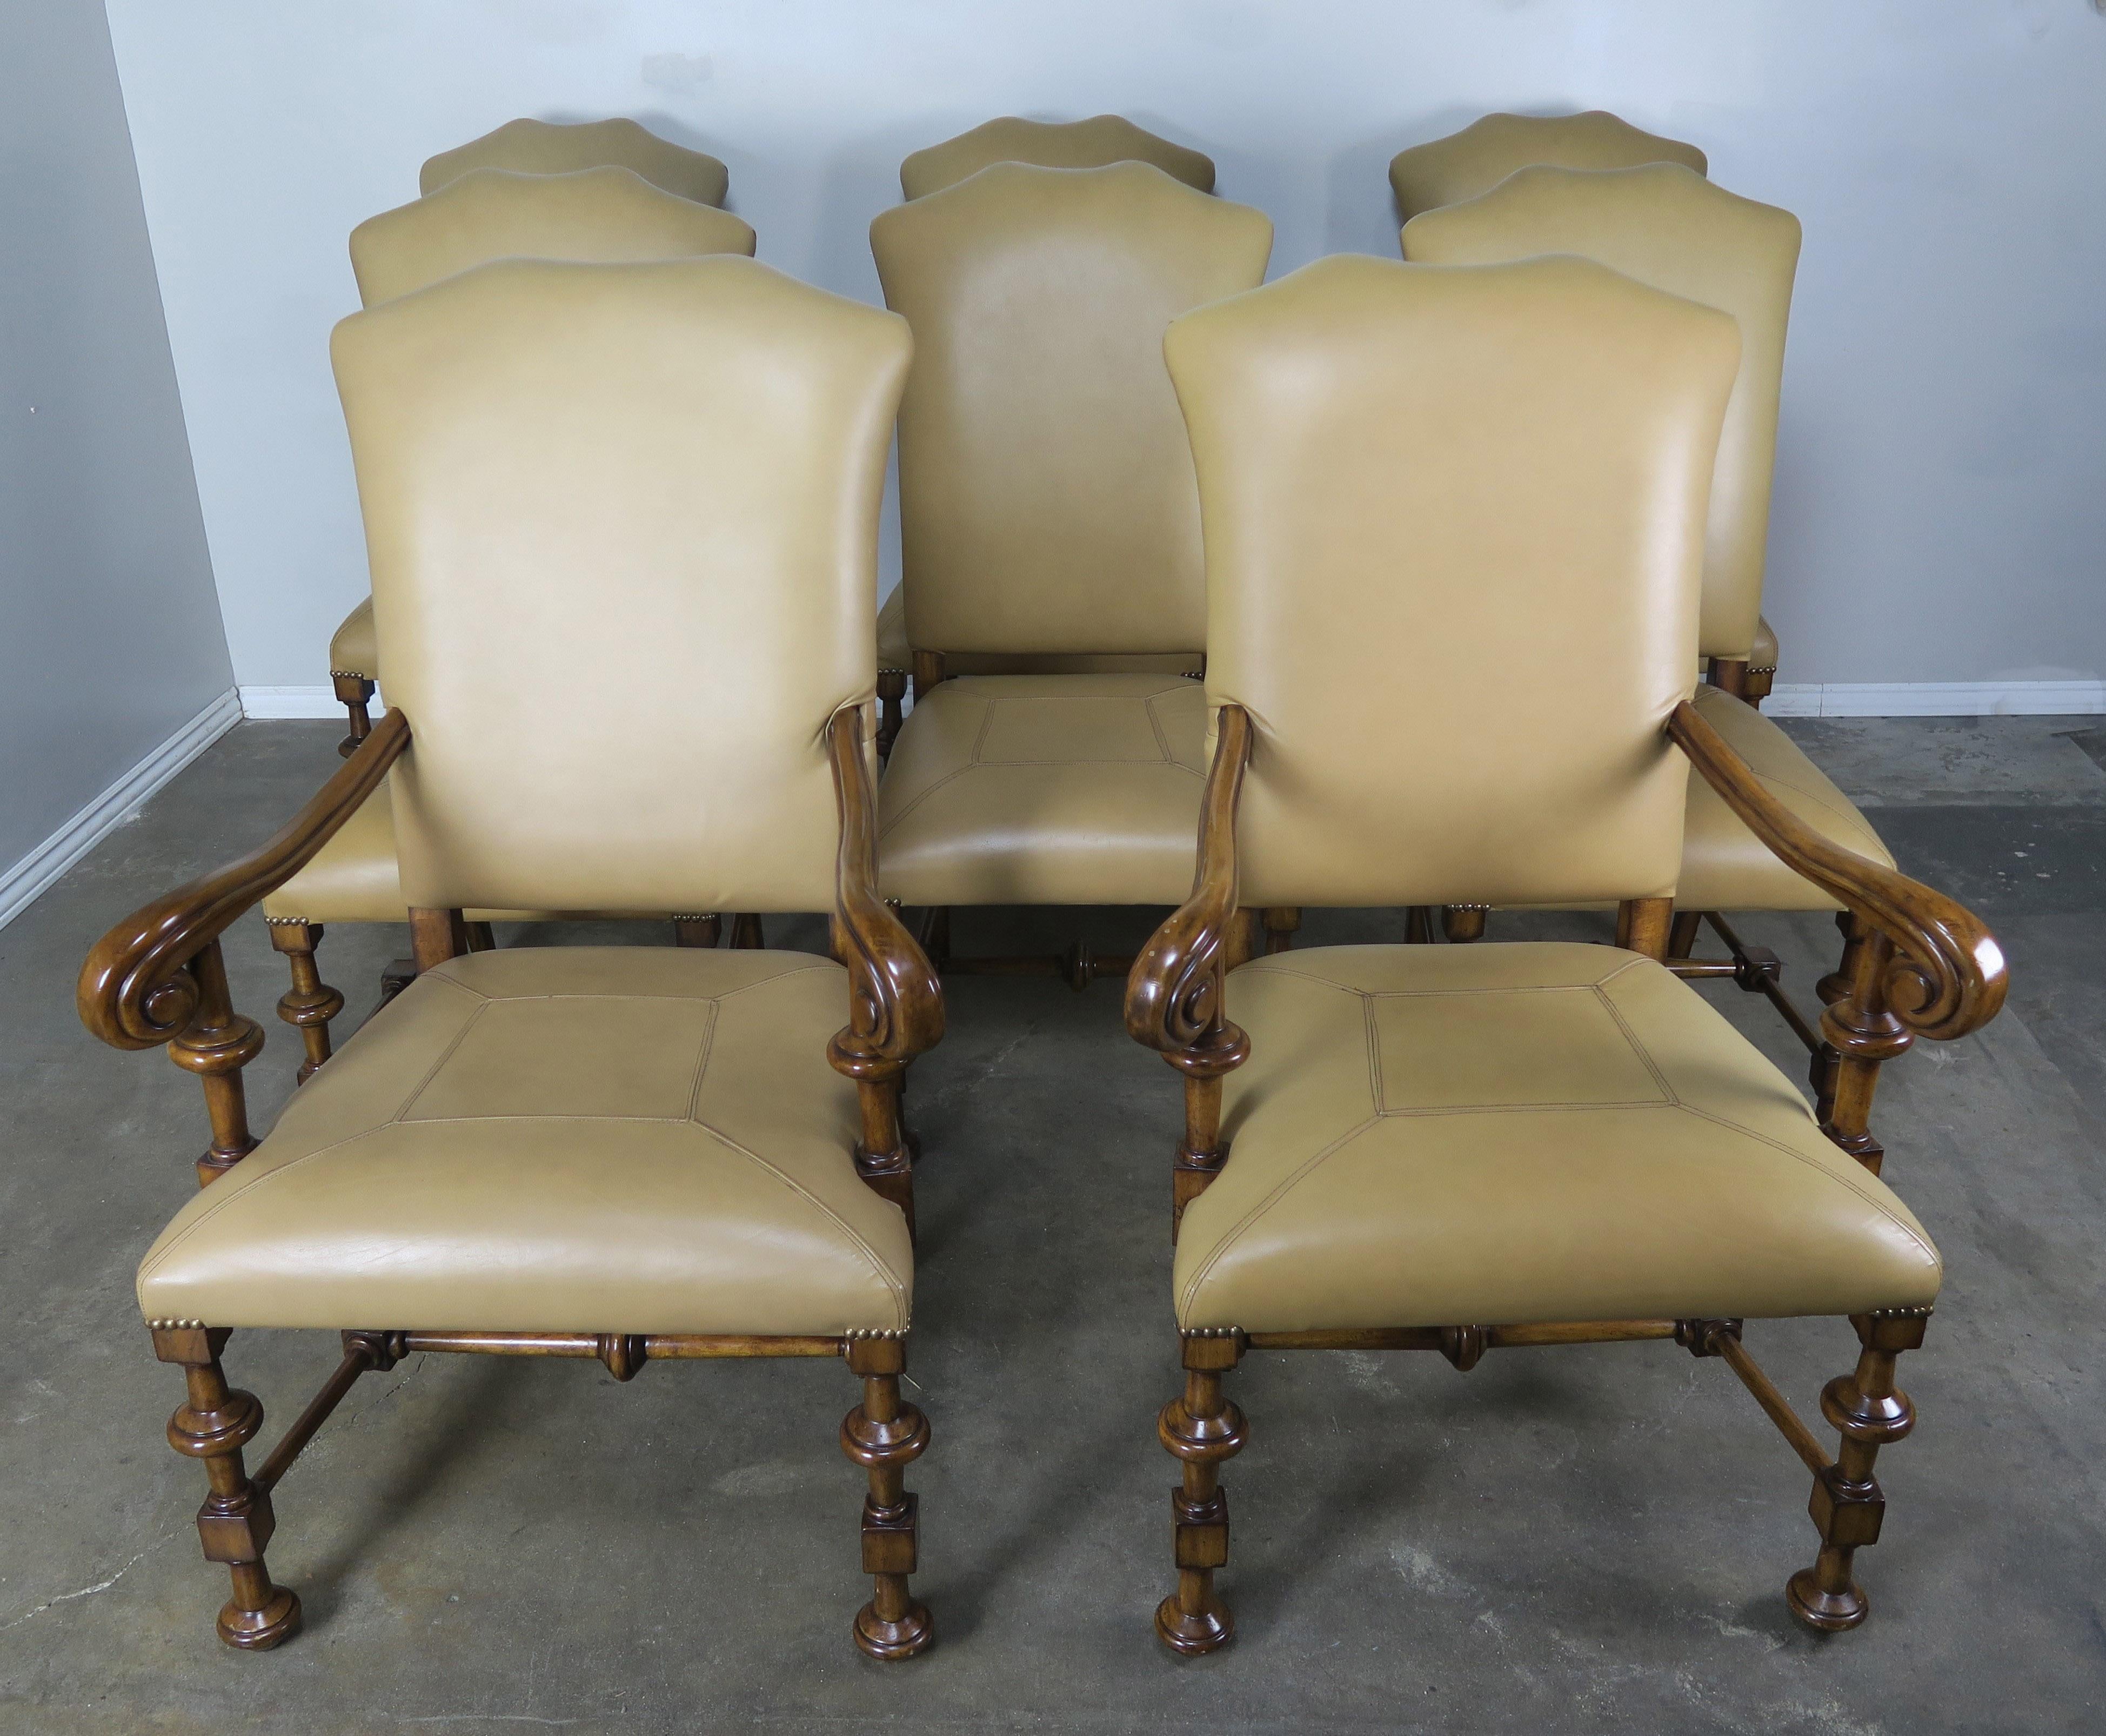 Set of eight Spanish walnut leather dining chairs. The chairs are beautifully upholstered in camel colored leather with beautifully shaped backs and baseball stitched seats.
Armchairs size: 27.5